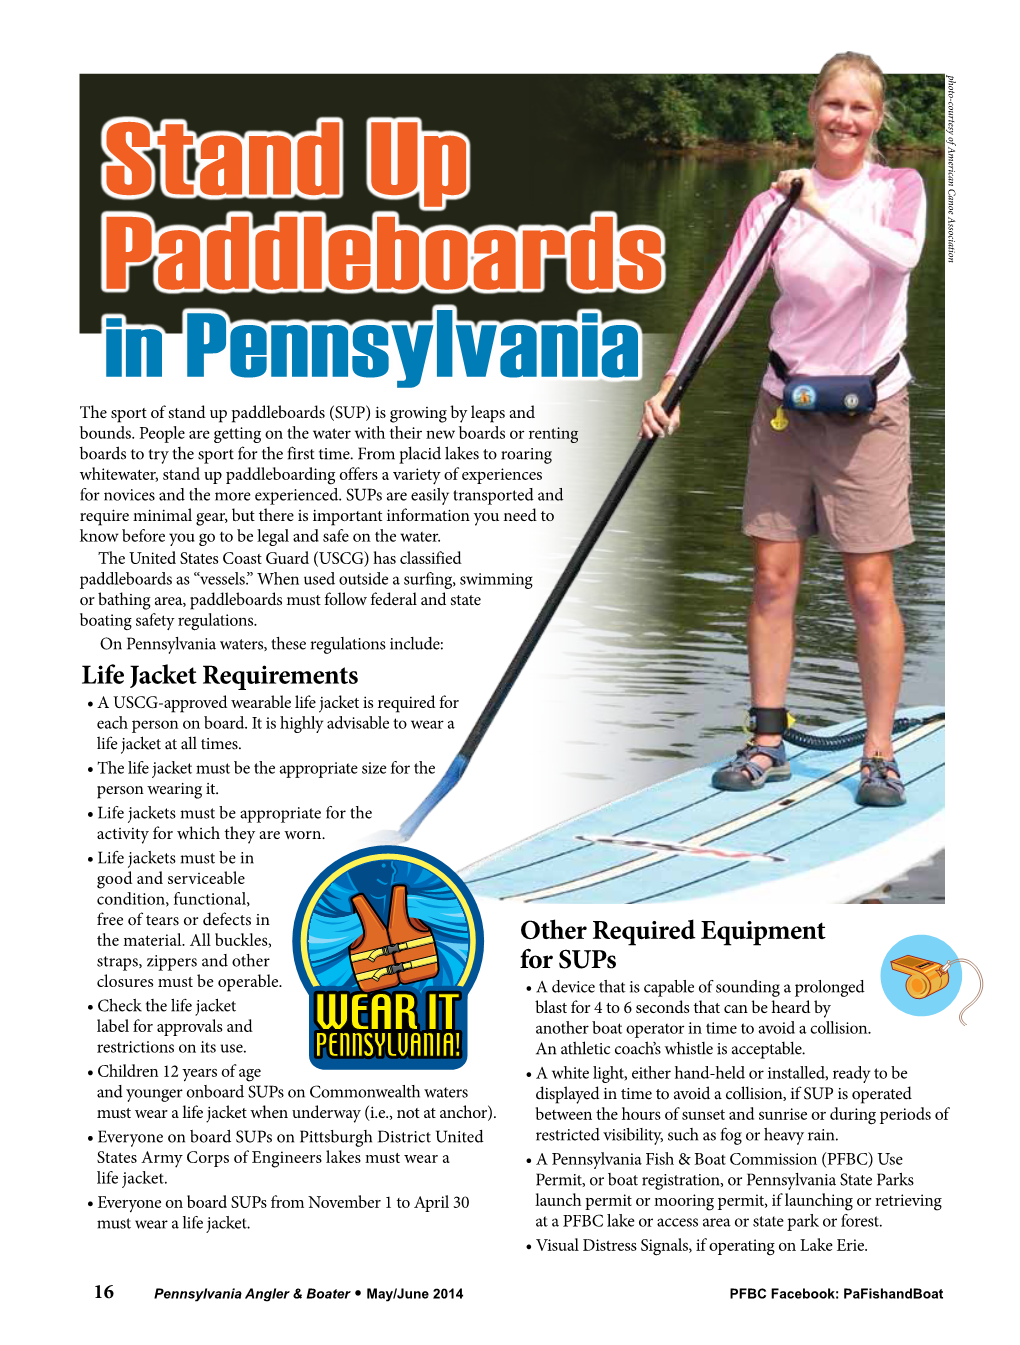 Stand up Paddleboards in Pennsylvania